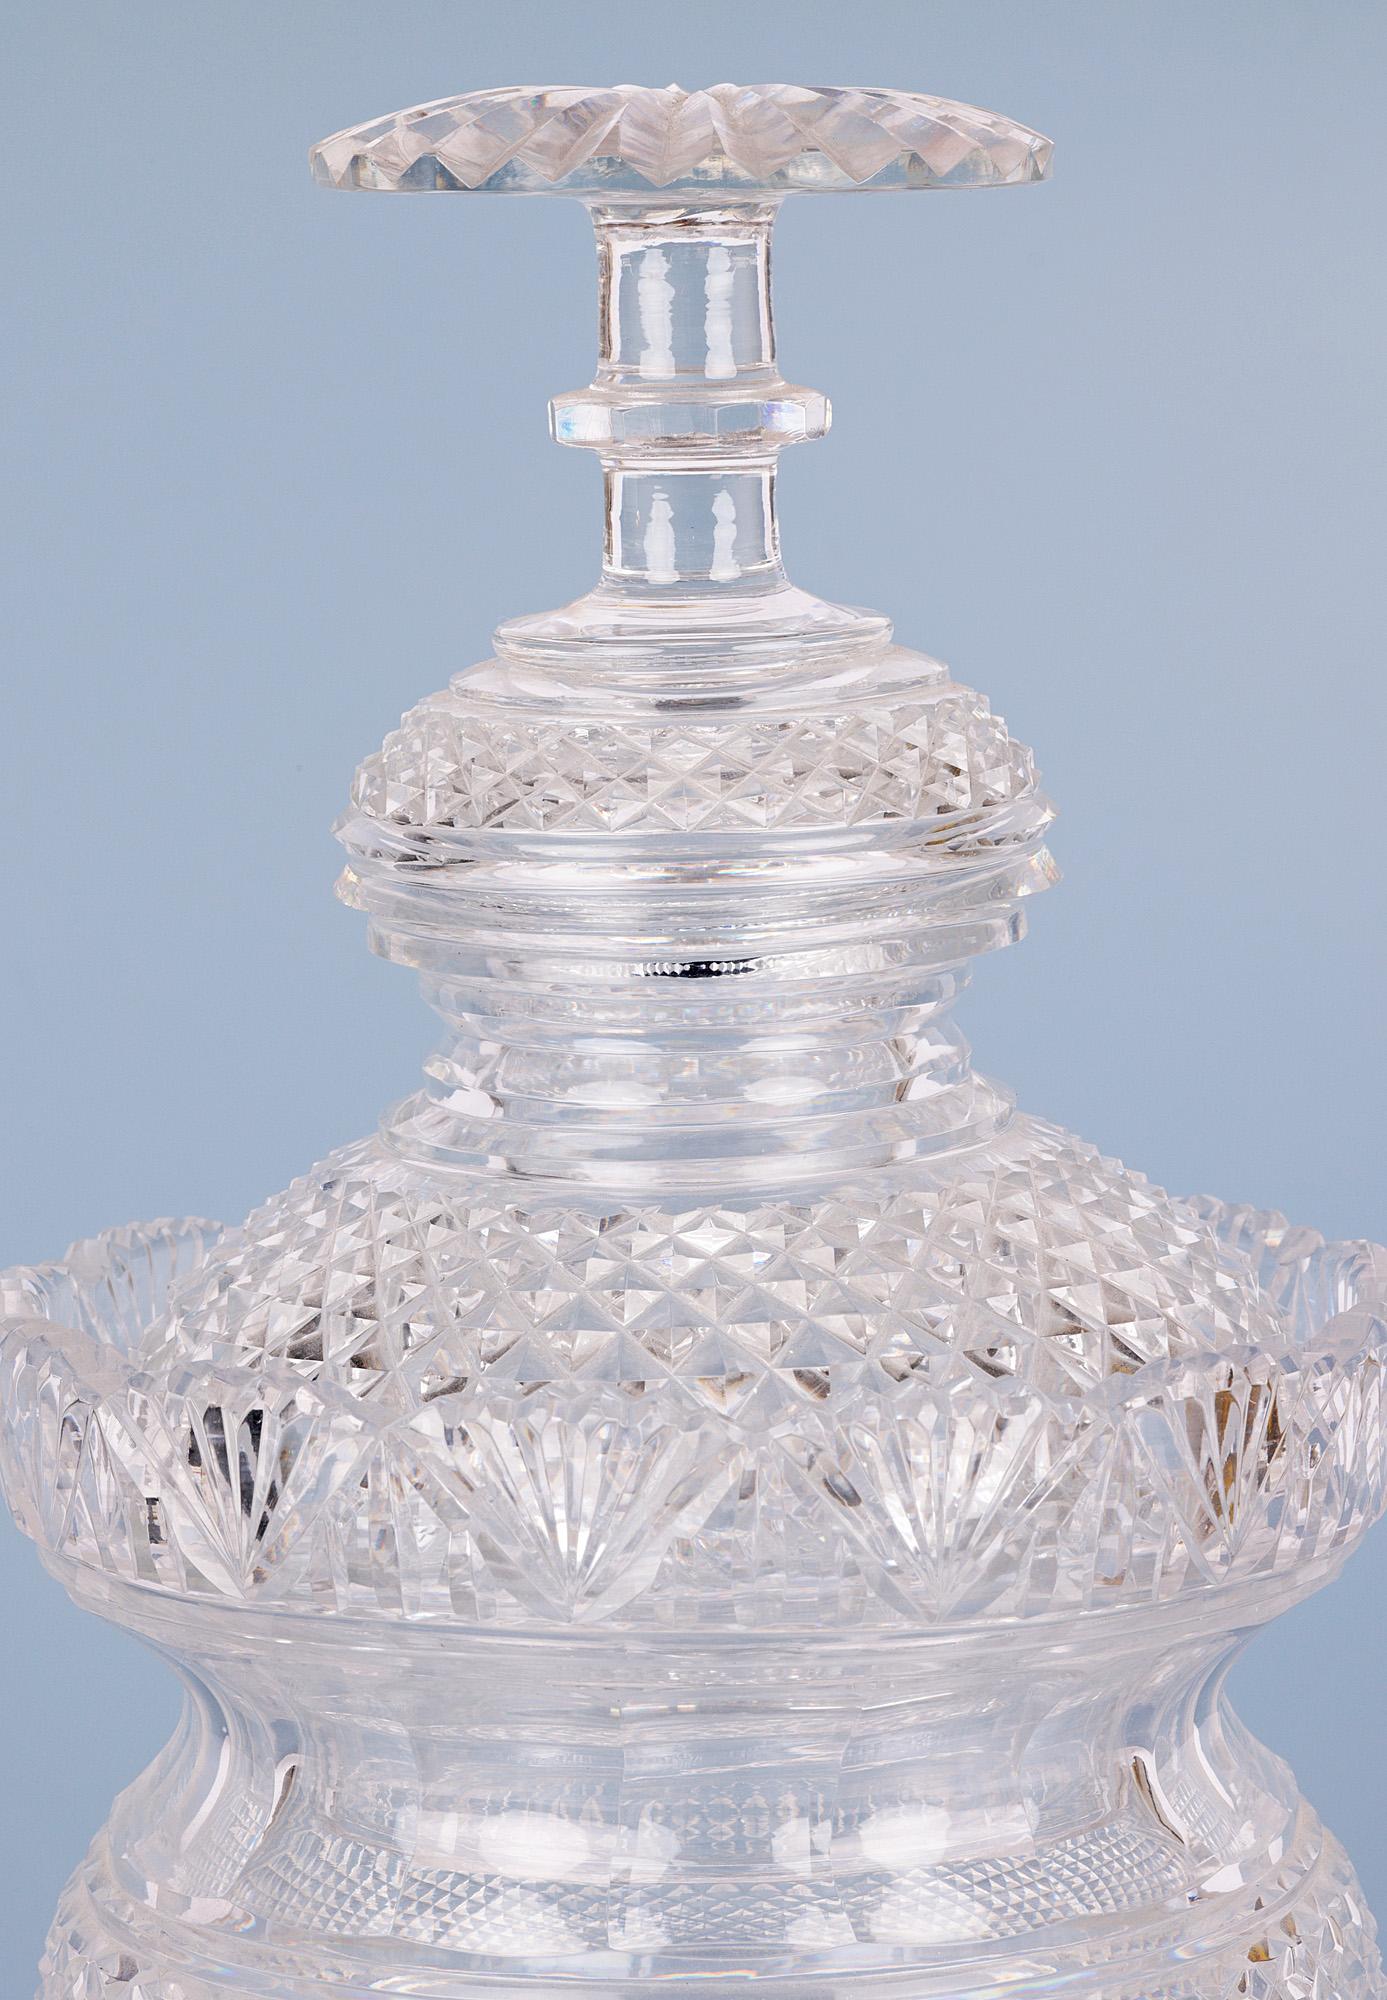 A very fine antique cut glass jar with matching cover dating from around 1825. The jar stands on a thick round star cut based foot with a round bulbous body with diamond and prism cut patterning with an ornate cut glass petal rim with a cover of